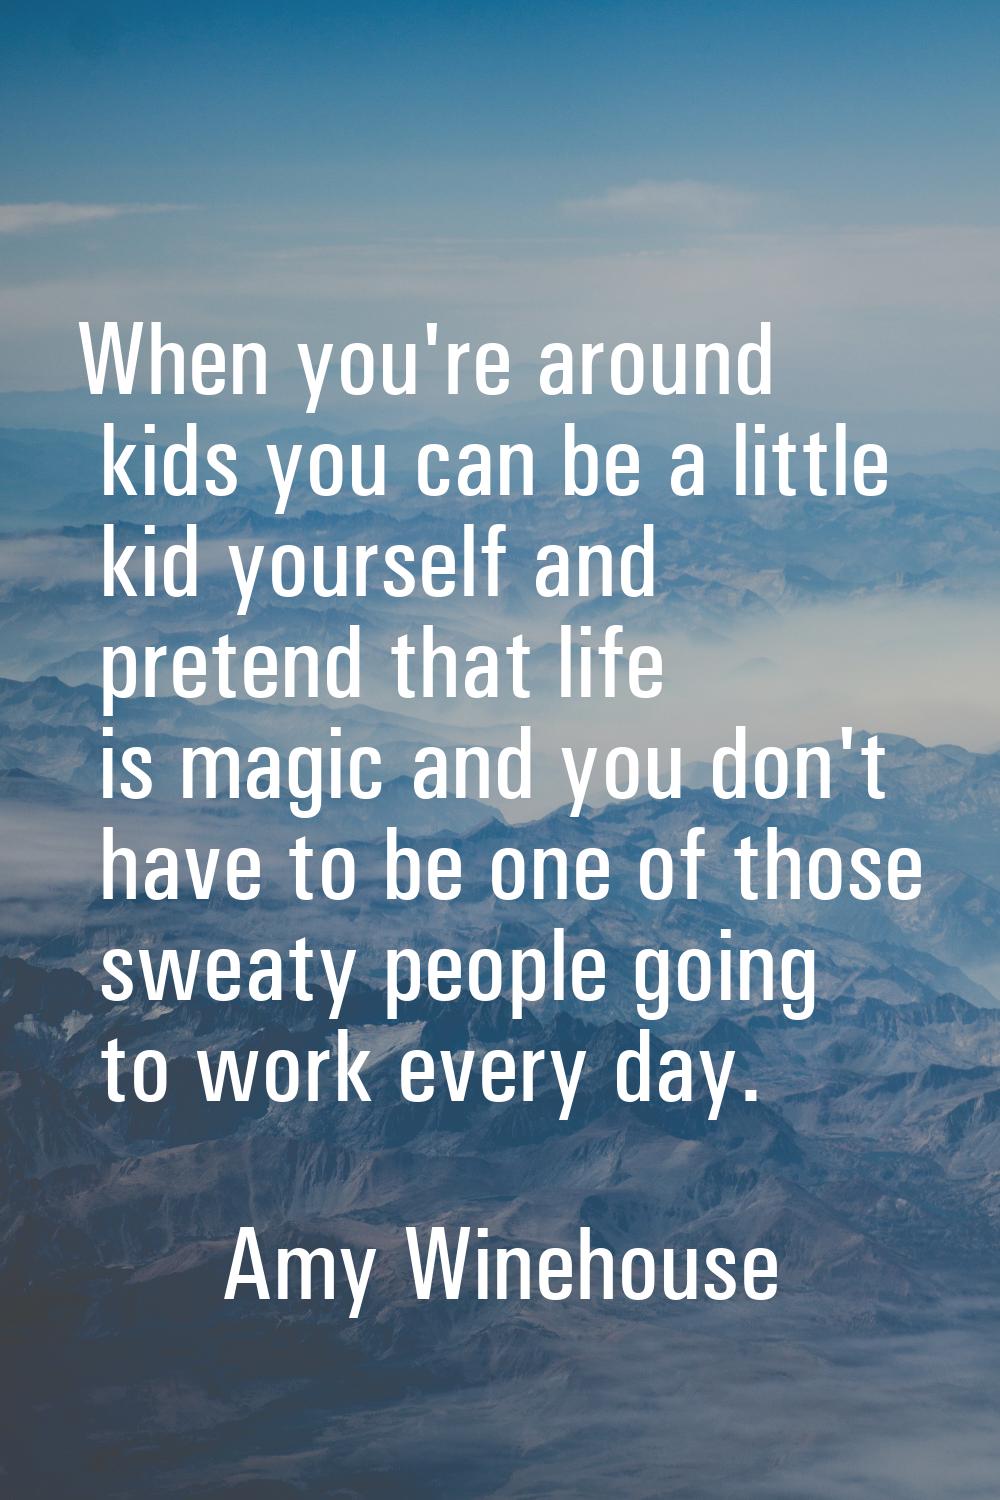 When you're around kids you can be a little kid yourself and pretend that life is magic and you don